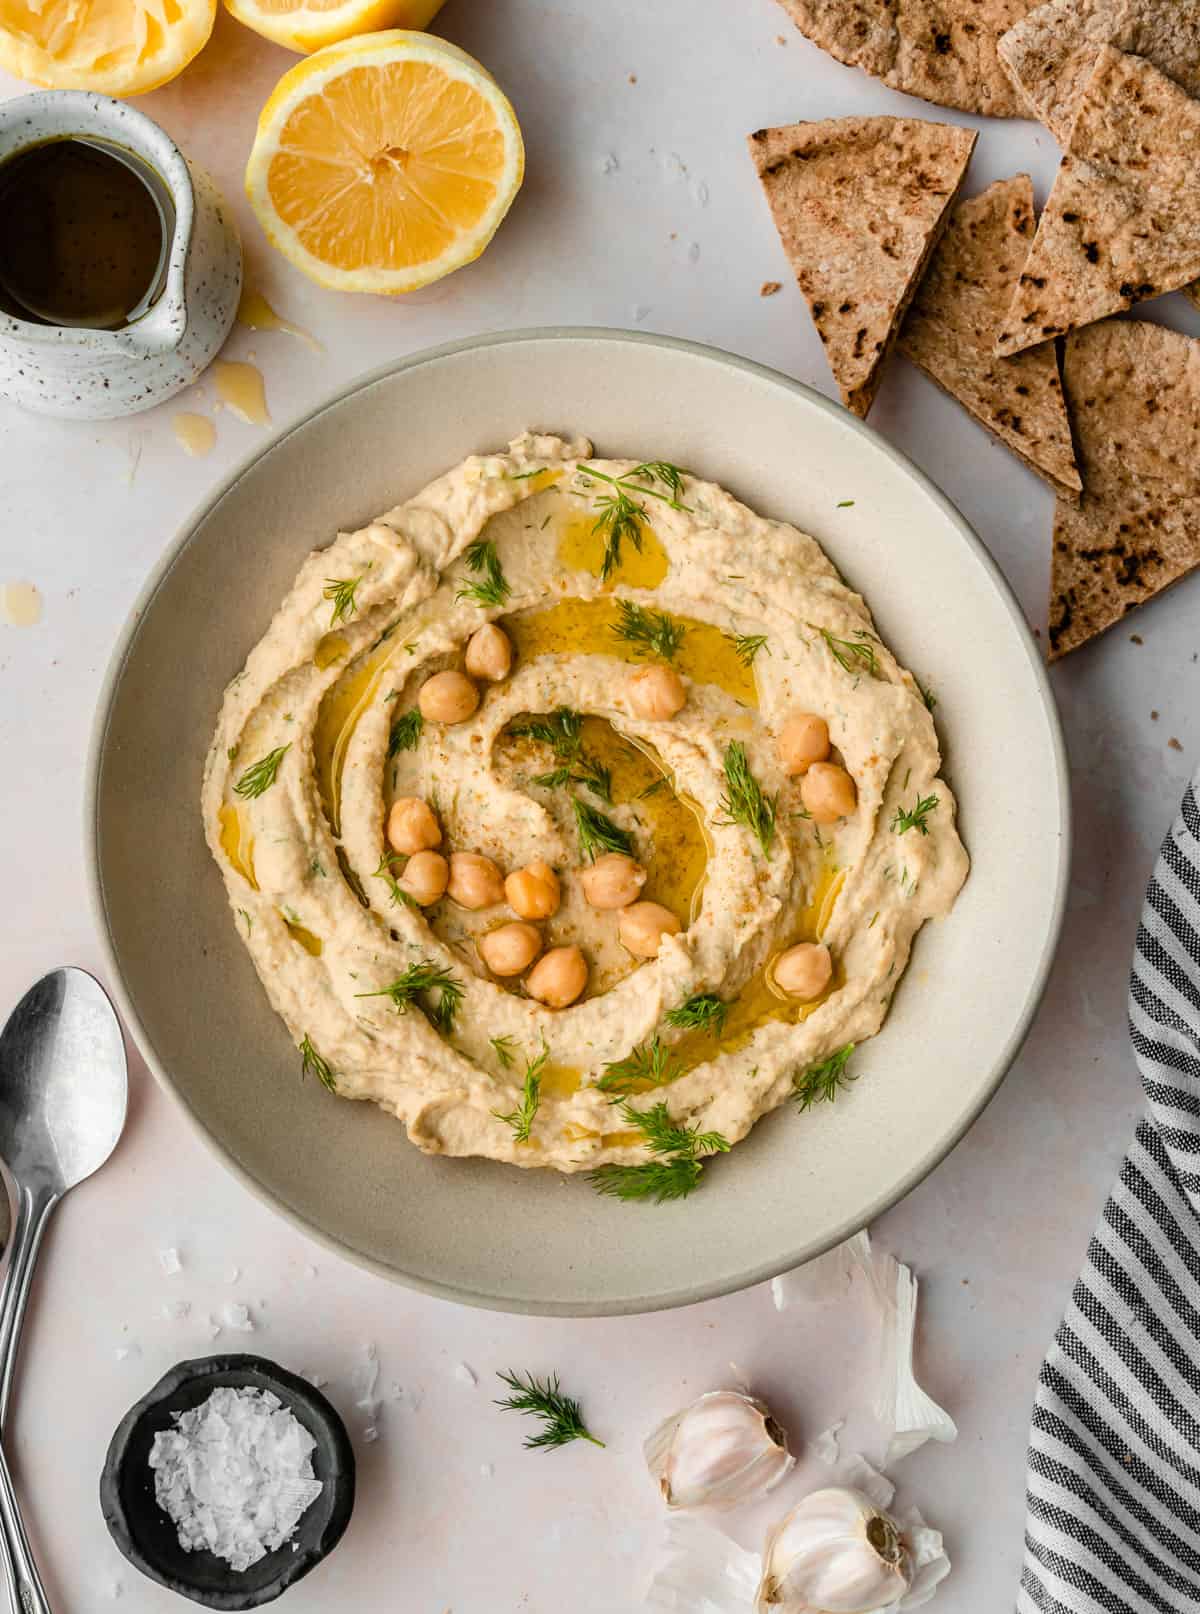 Lemon dill hummus in a dish with crackers and garlic cloves on the side. 